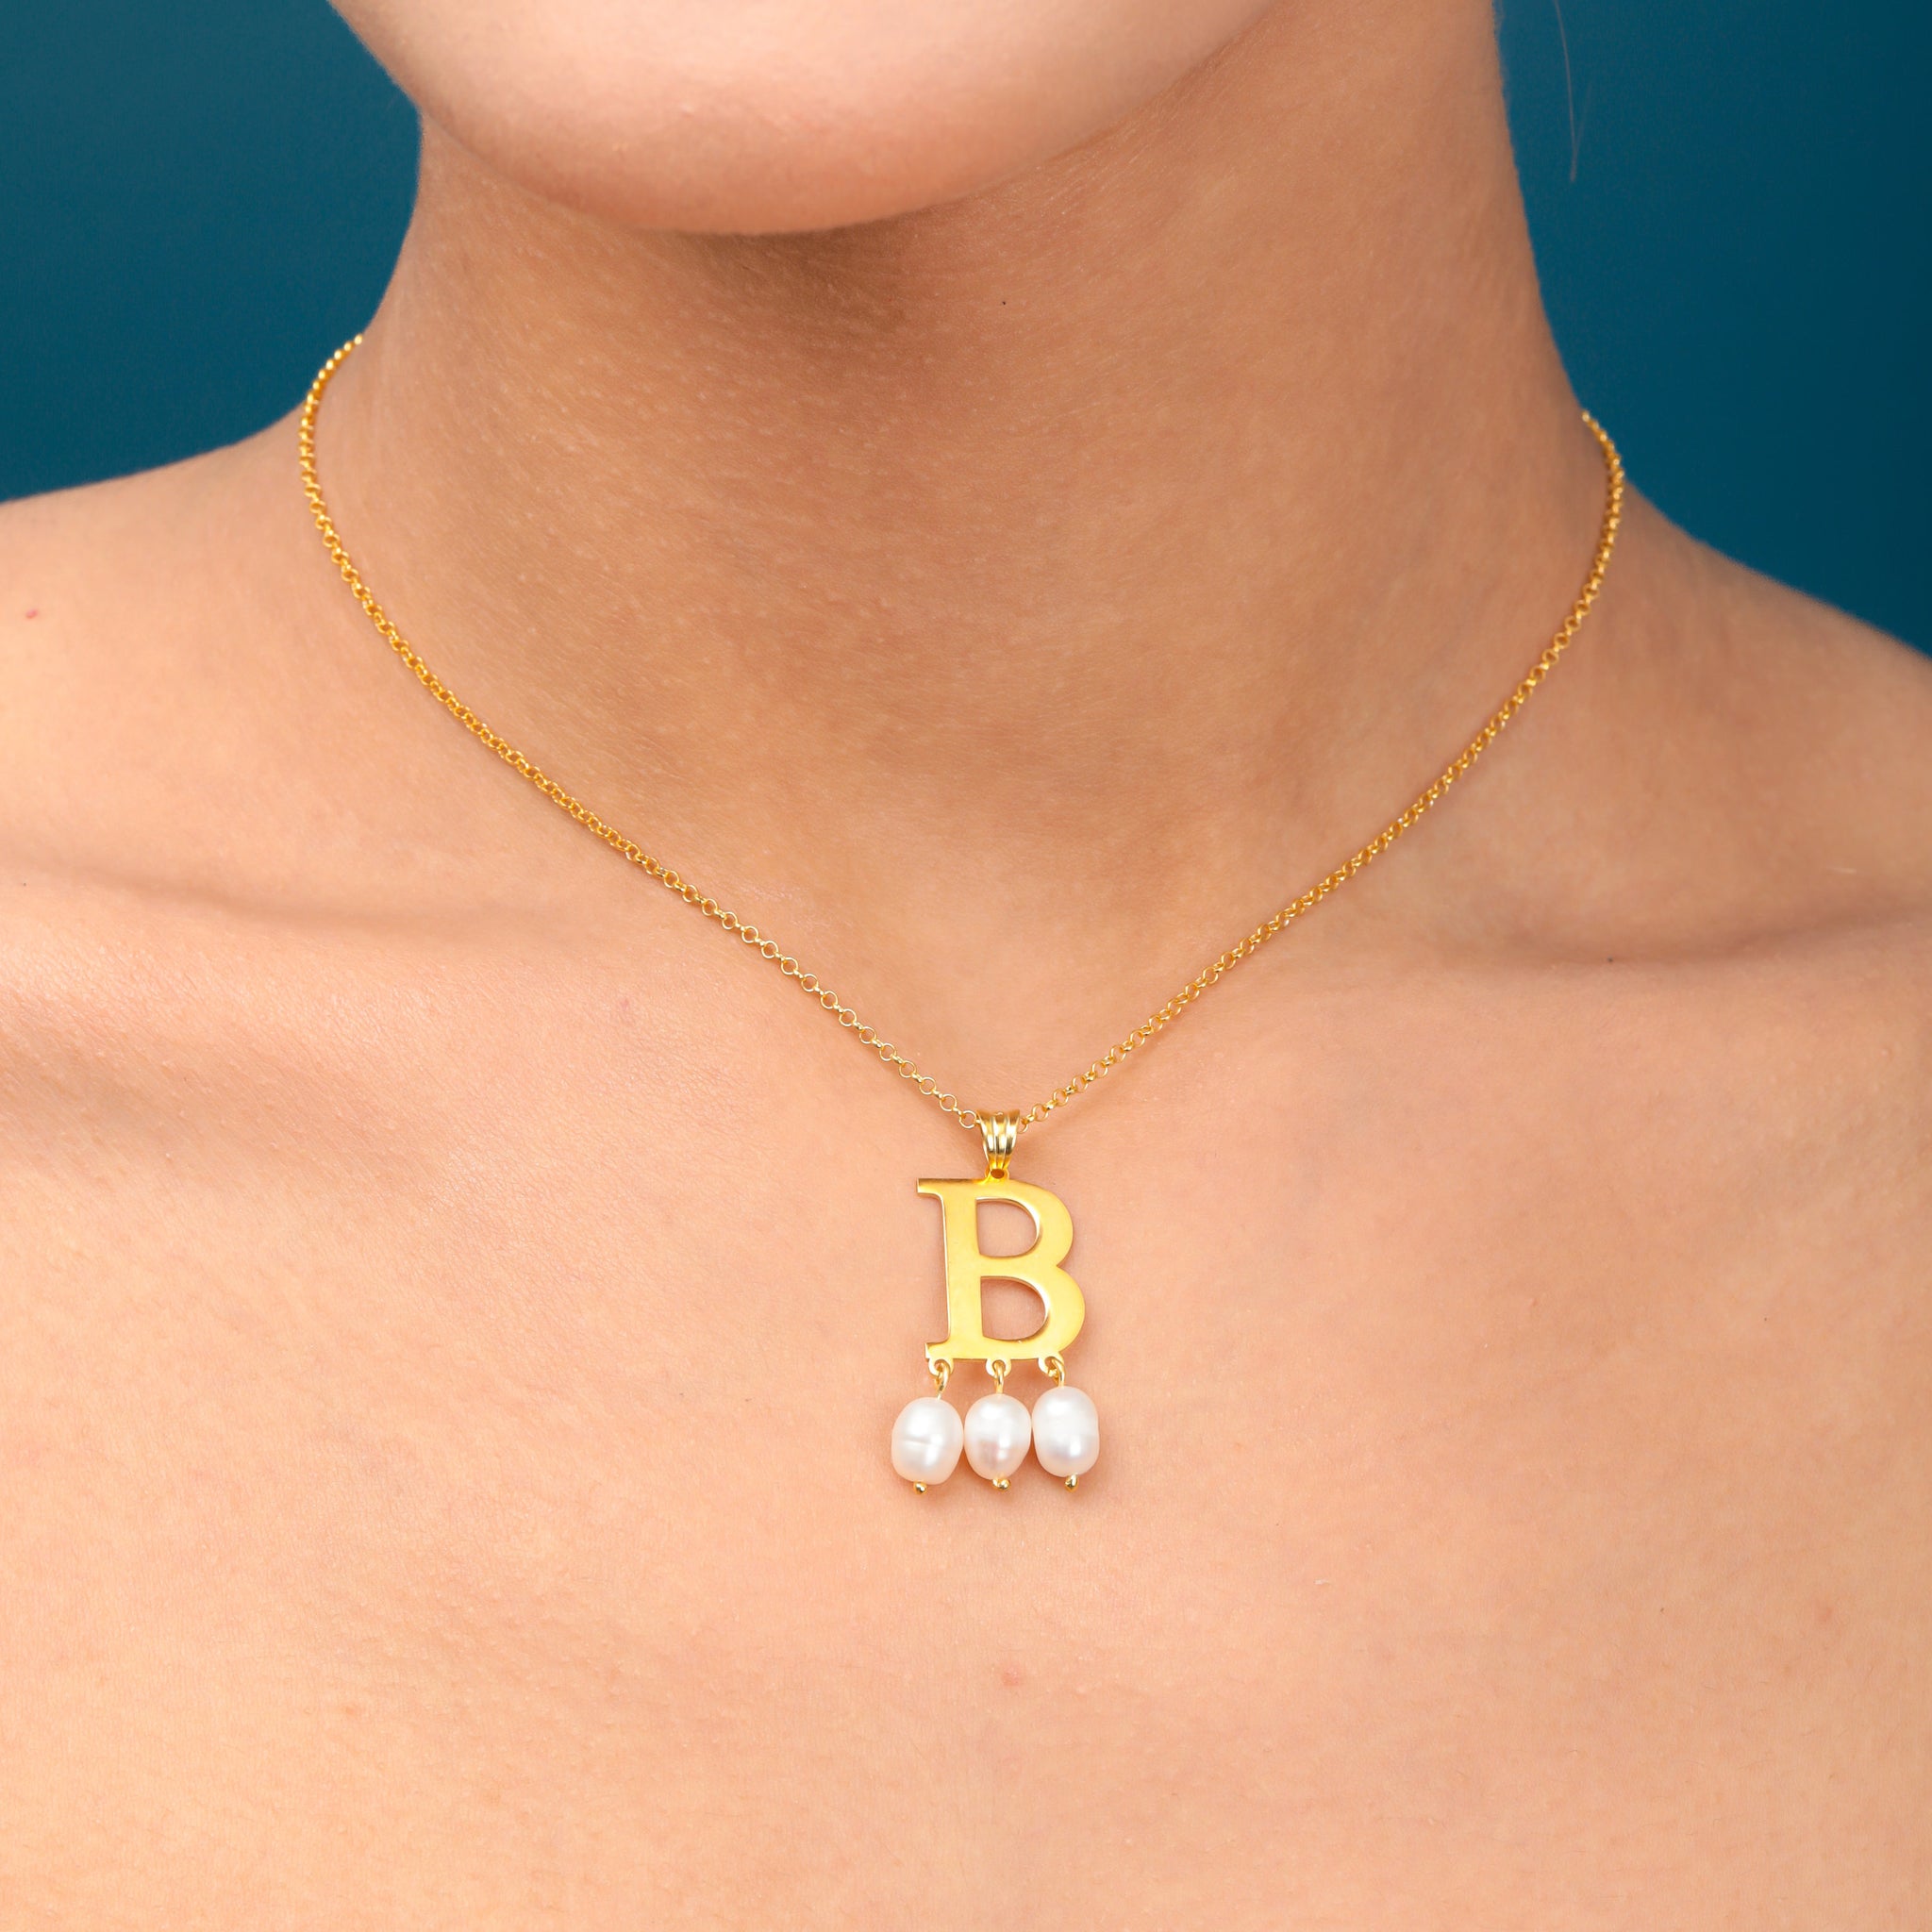 Anne Boleyn Necklace Sterling Silver, Gold Filled Initial Necklace Personalized, Pearls Beaded Letter Necklace, Promoted Gift, Daughter Gift